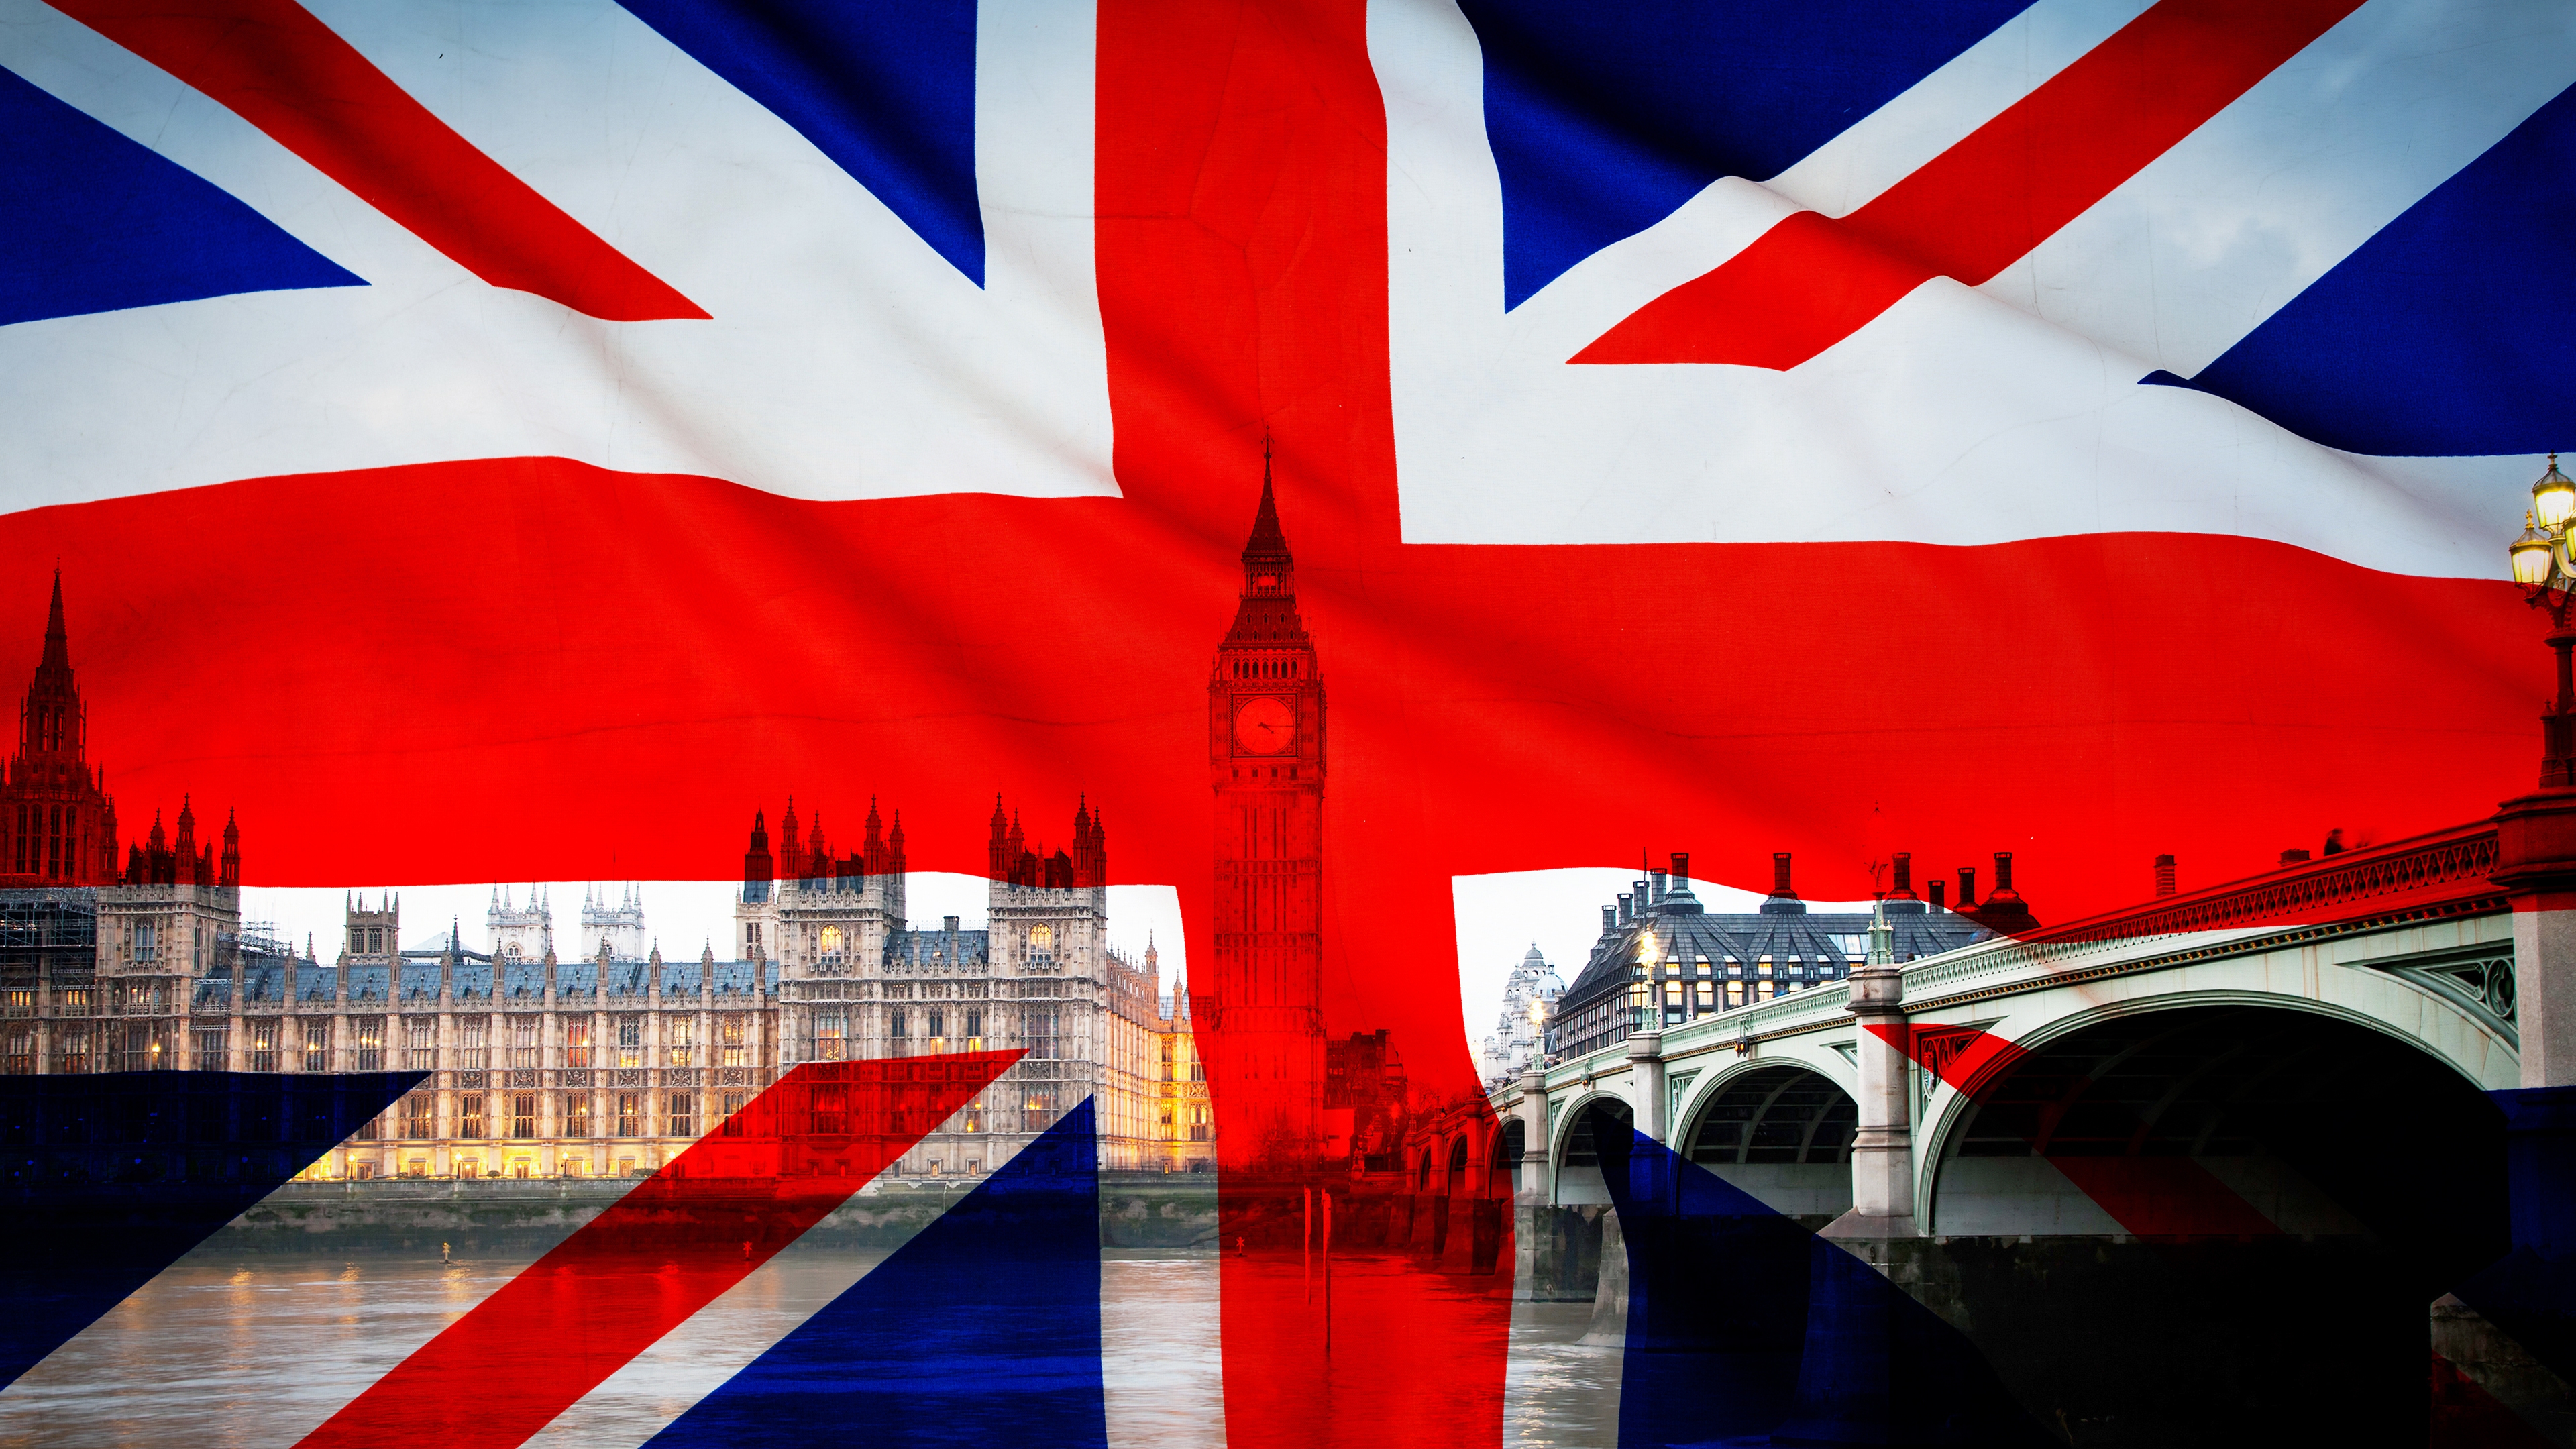 Union Jack – Flag of the UK for 3840 x 2160 Ultra HD resolution